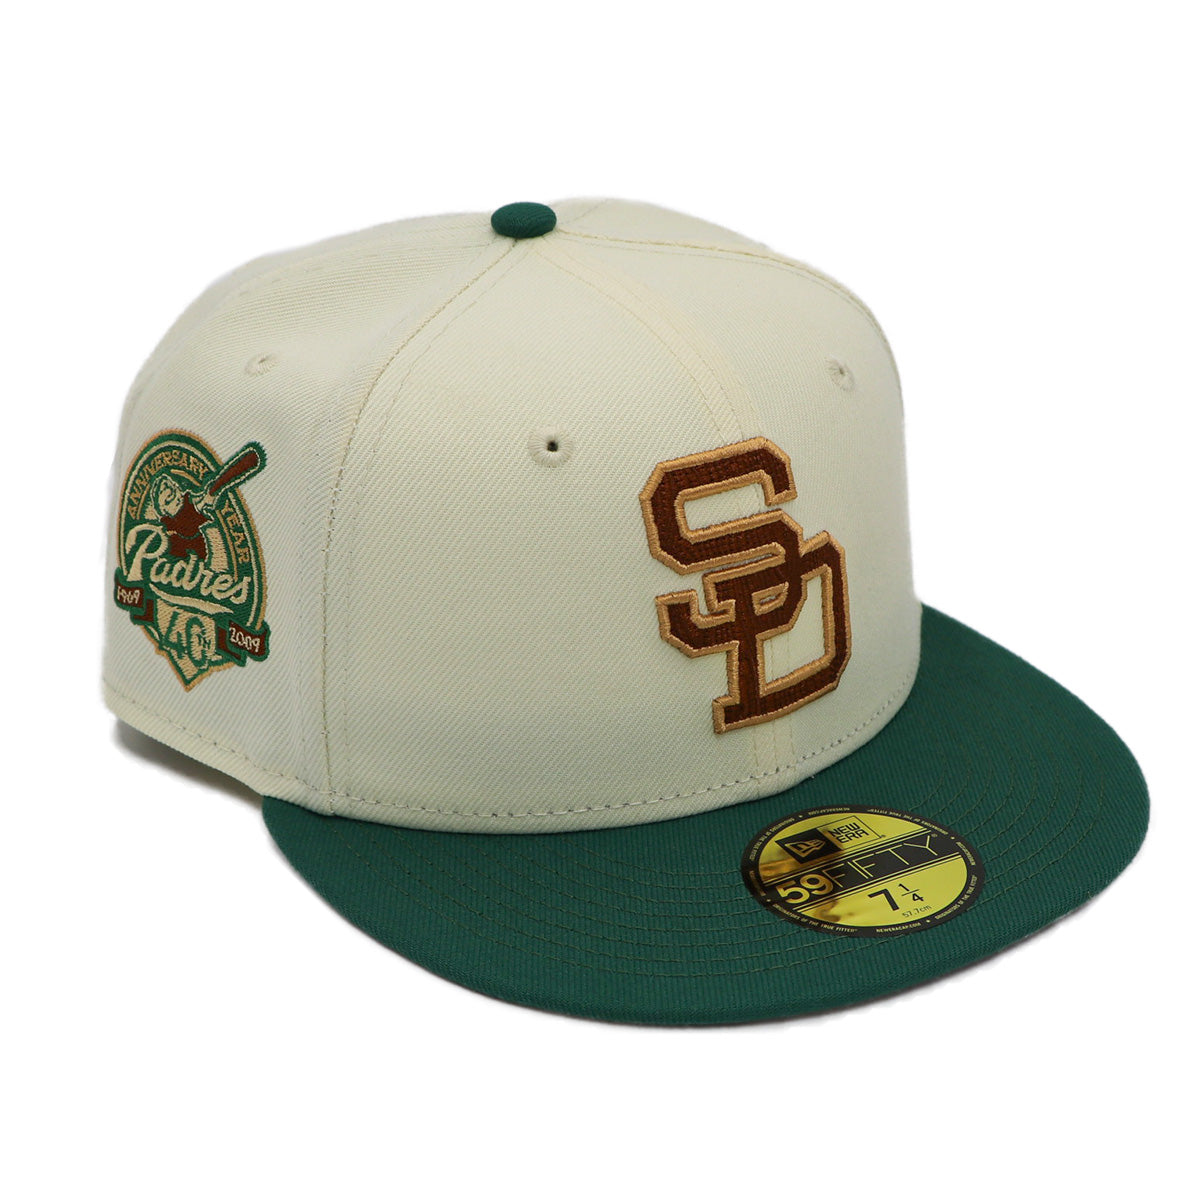 New Era 59FIFTY San Diego Padres Two Tone Color Pack Fitted Hat Chrome White Blue